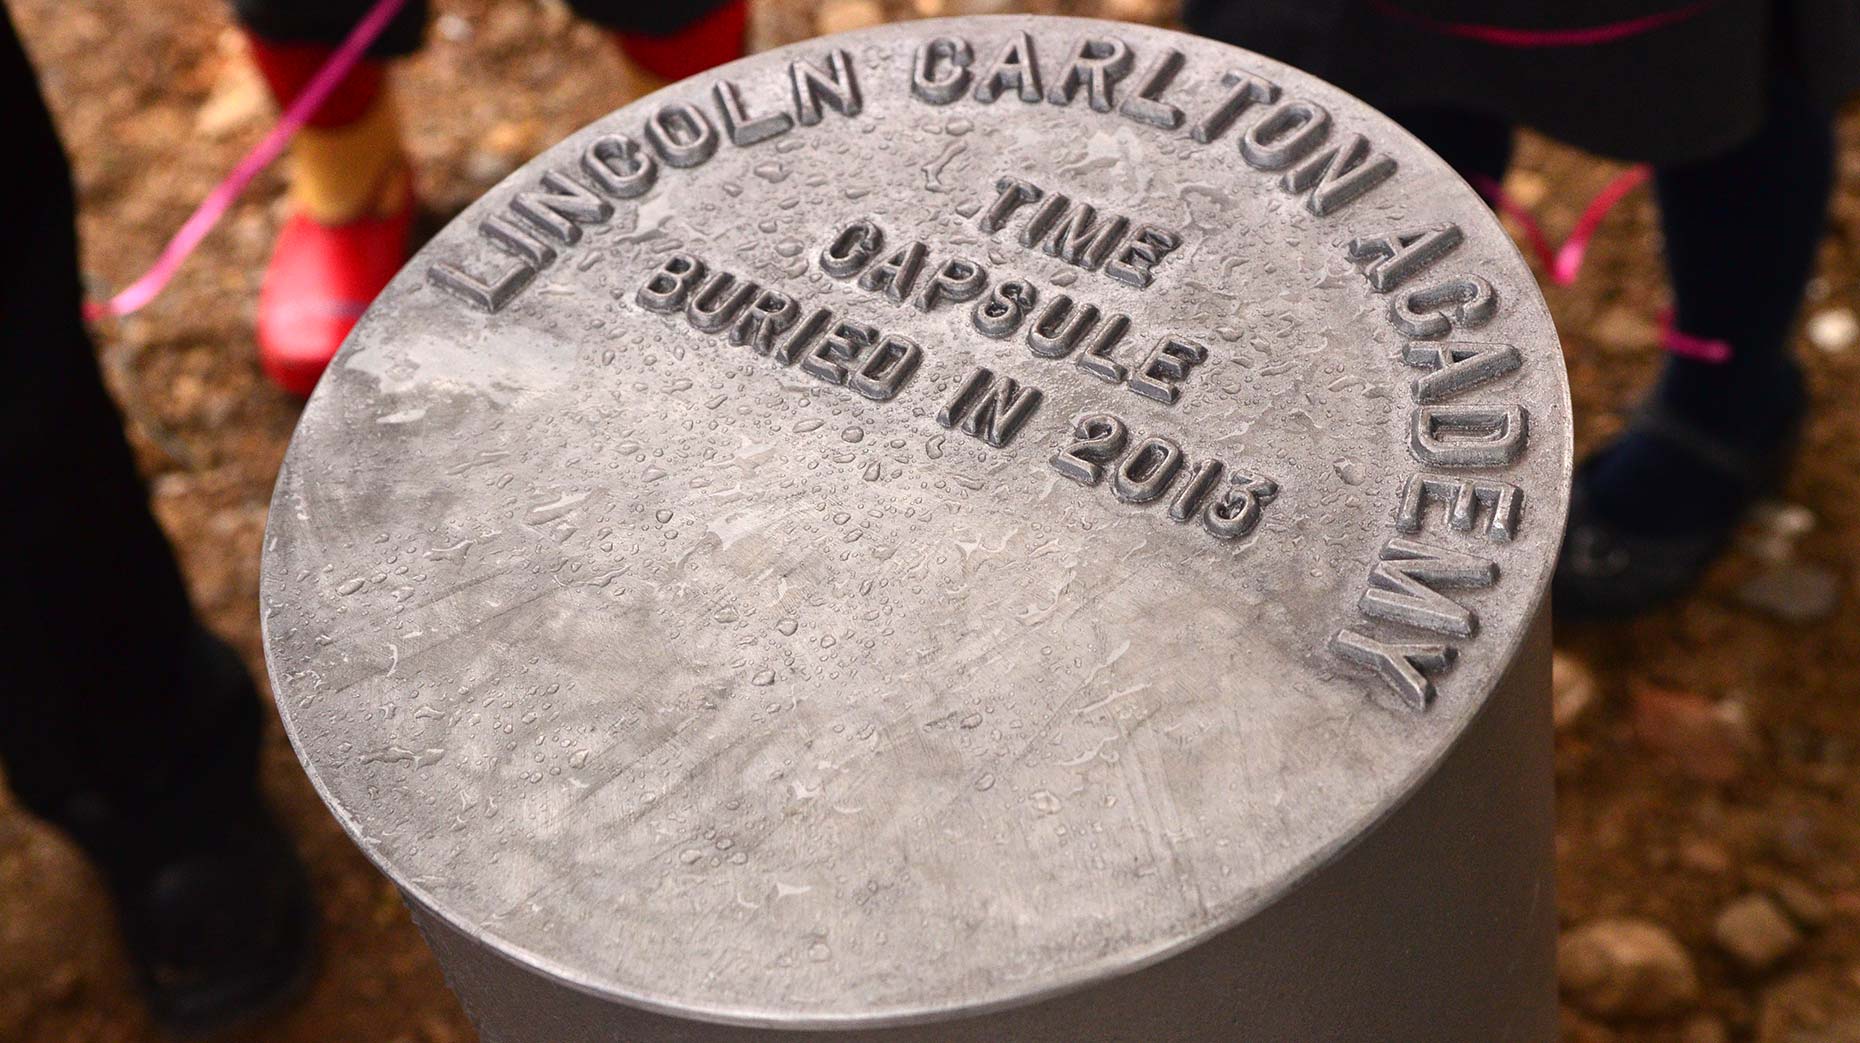 The students' time capsule. Photo: Steve Smailes for The Lincolnite